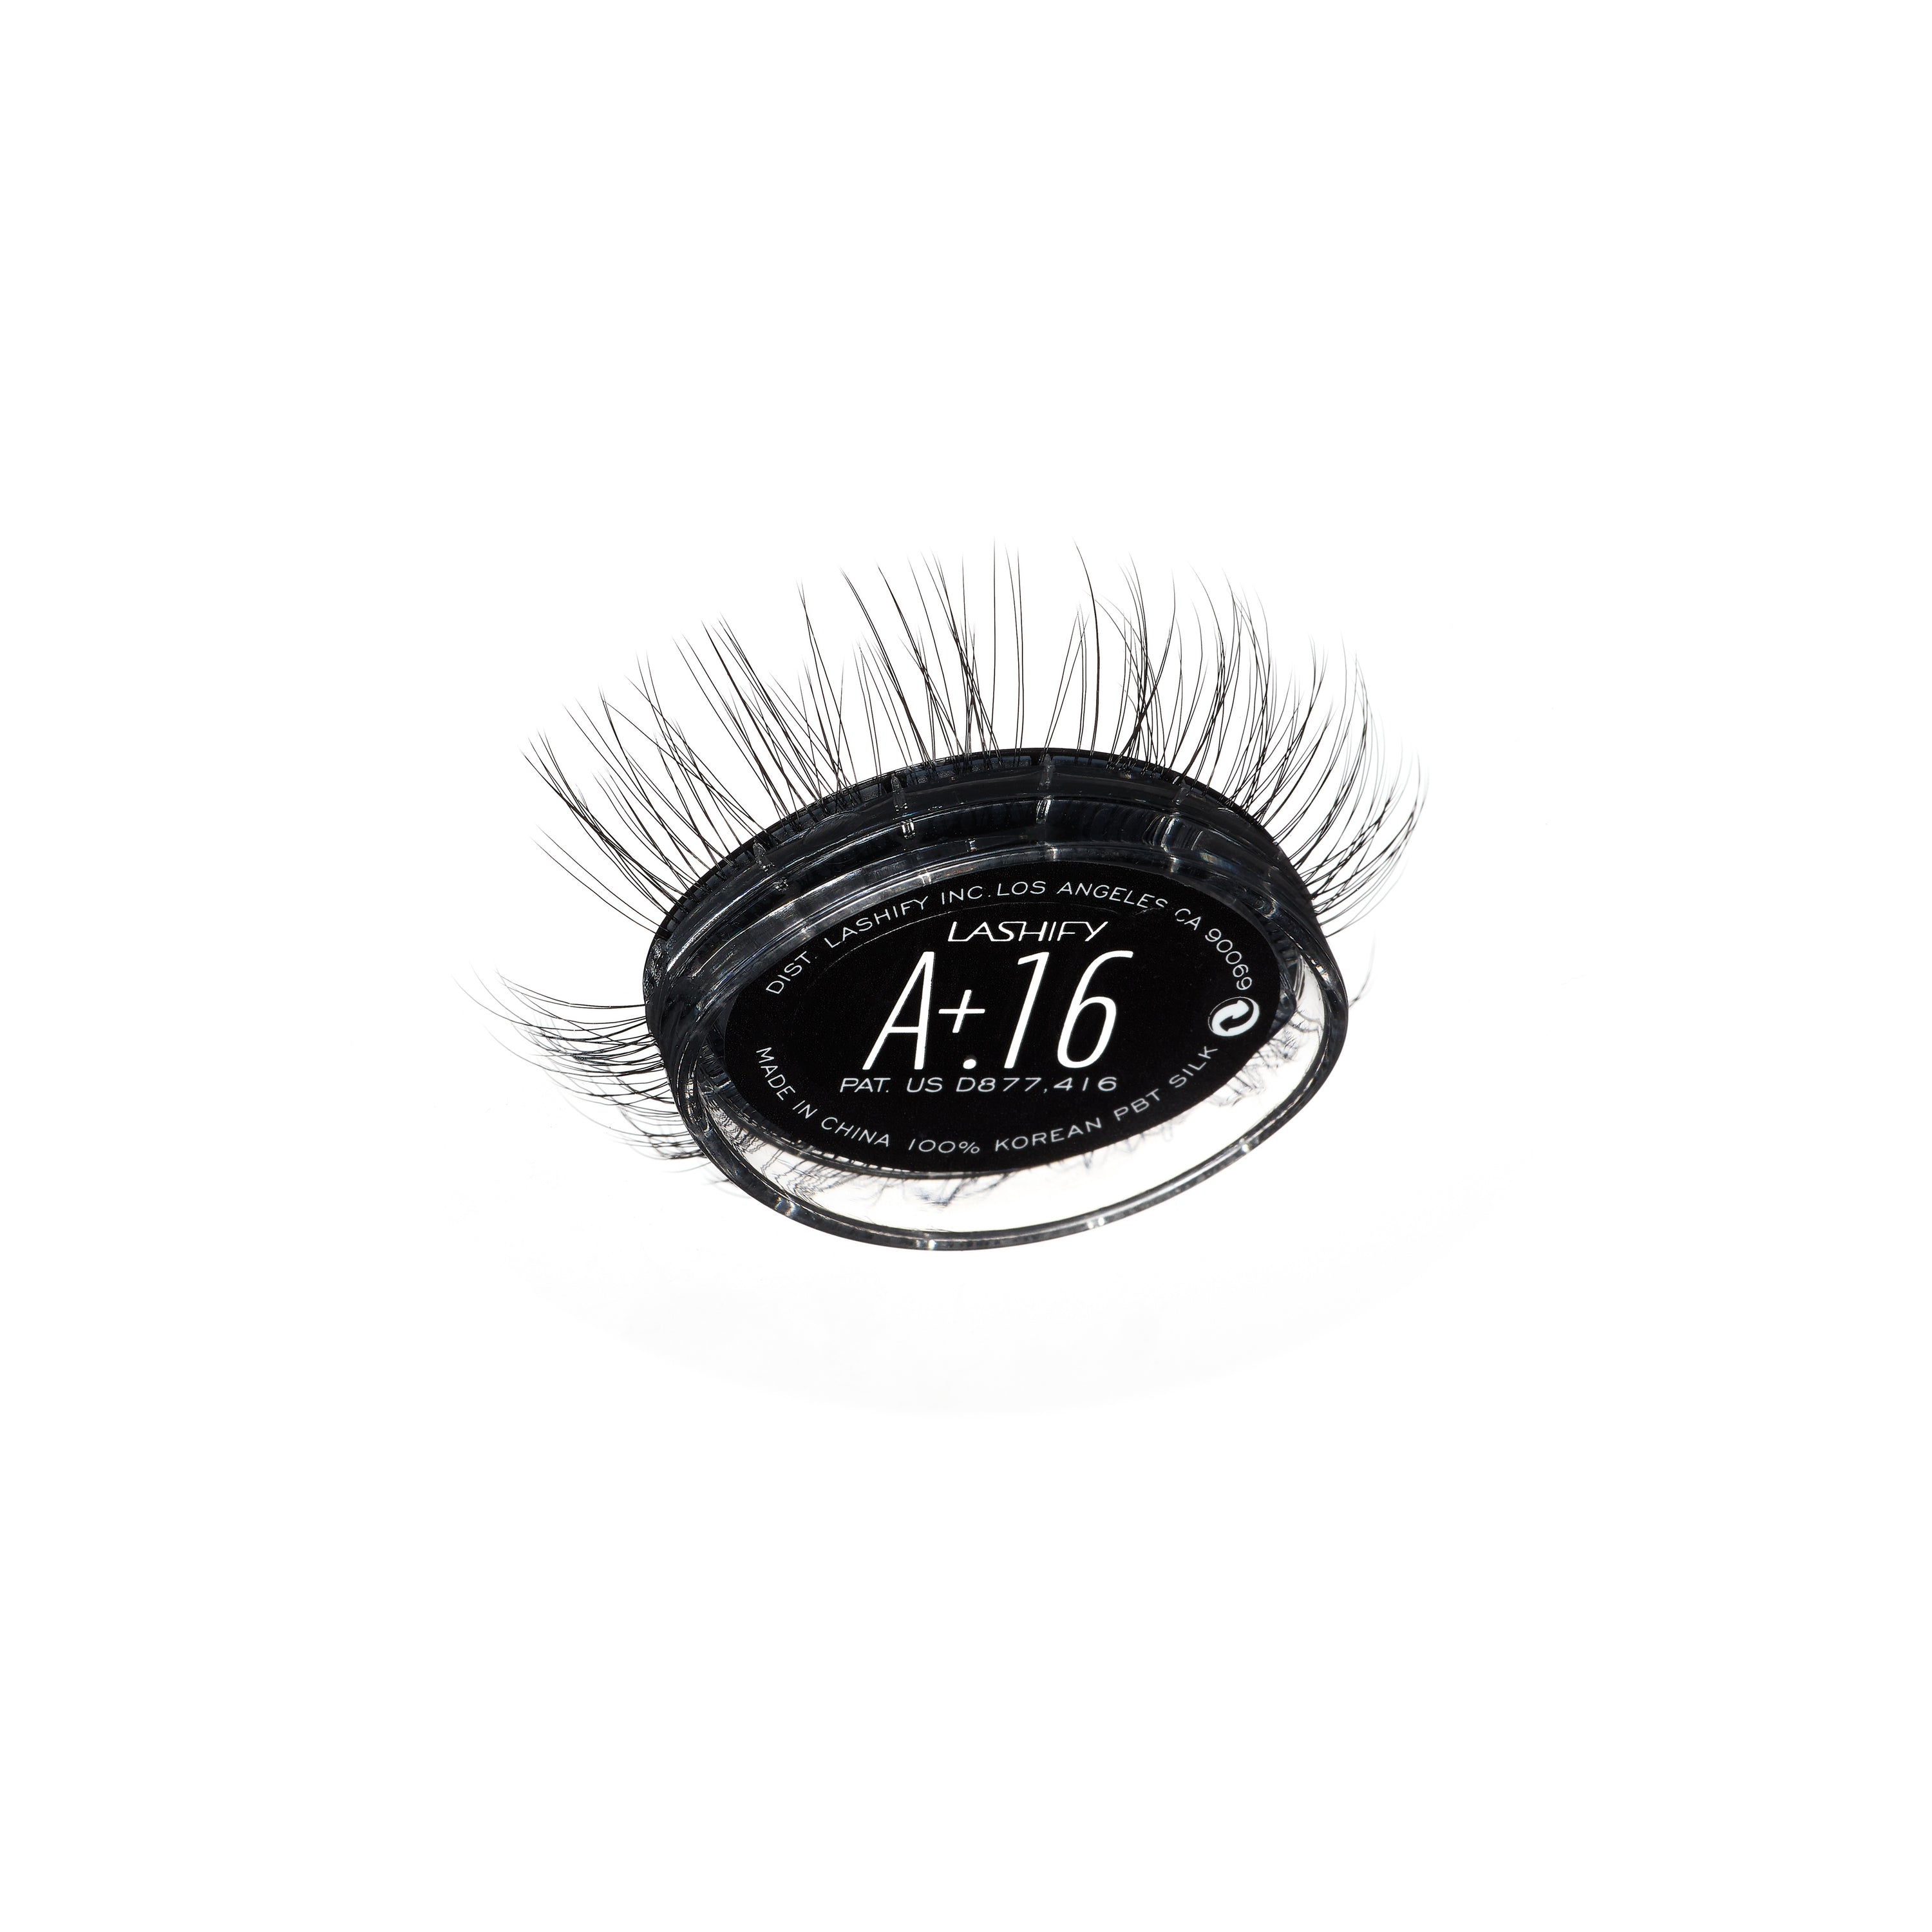 Amplify+ Gossamer® Lashes - Pro Pack (4 count)